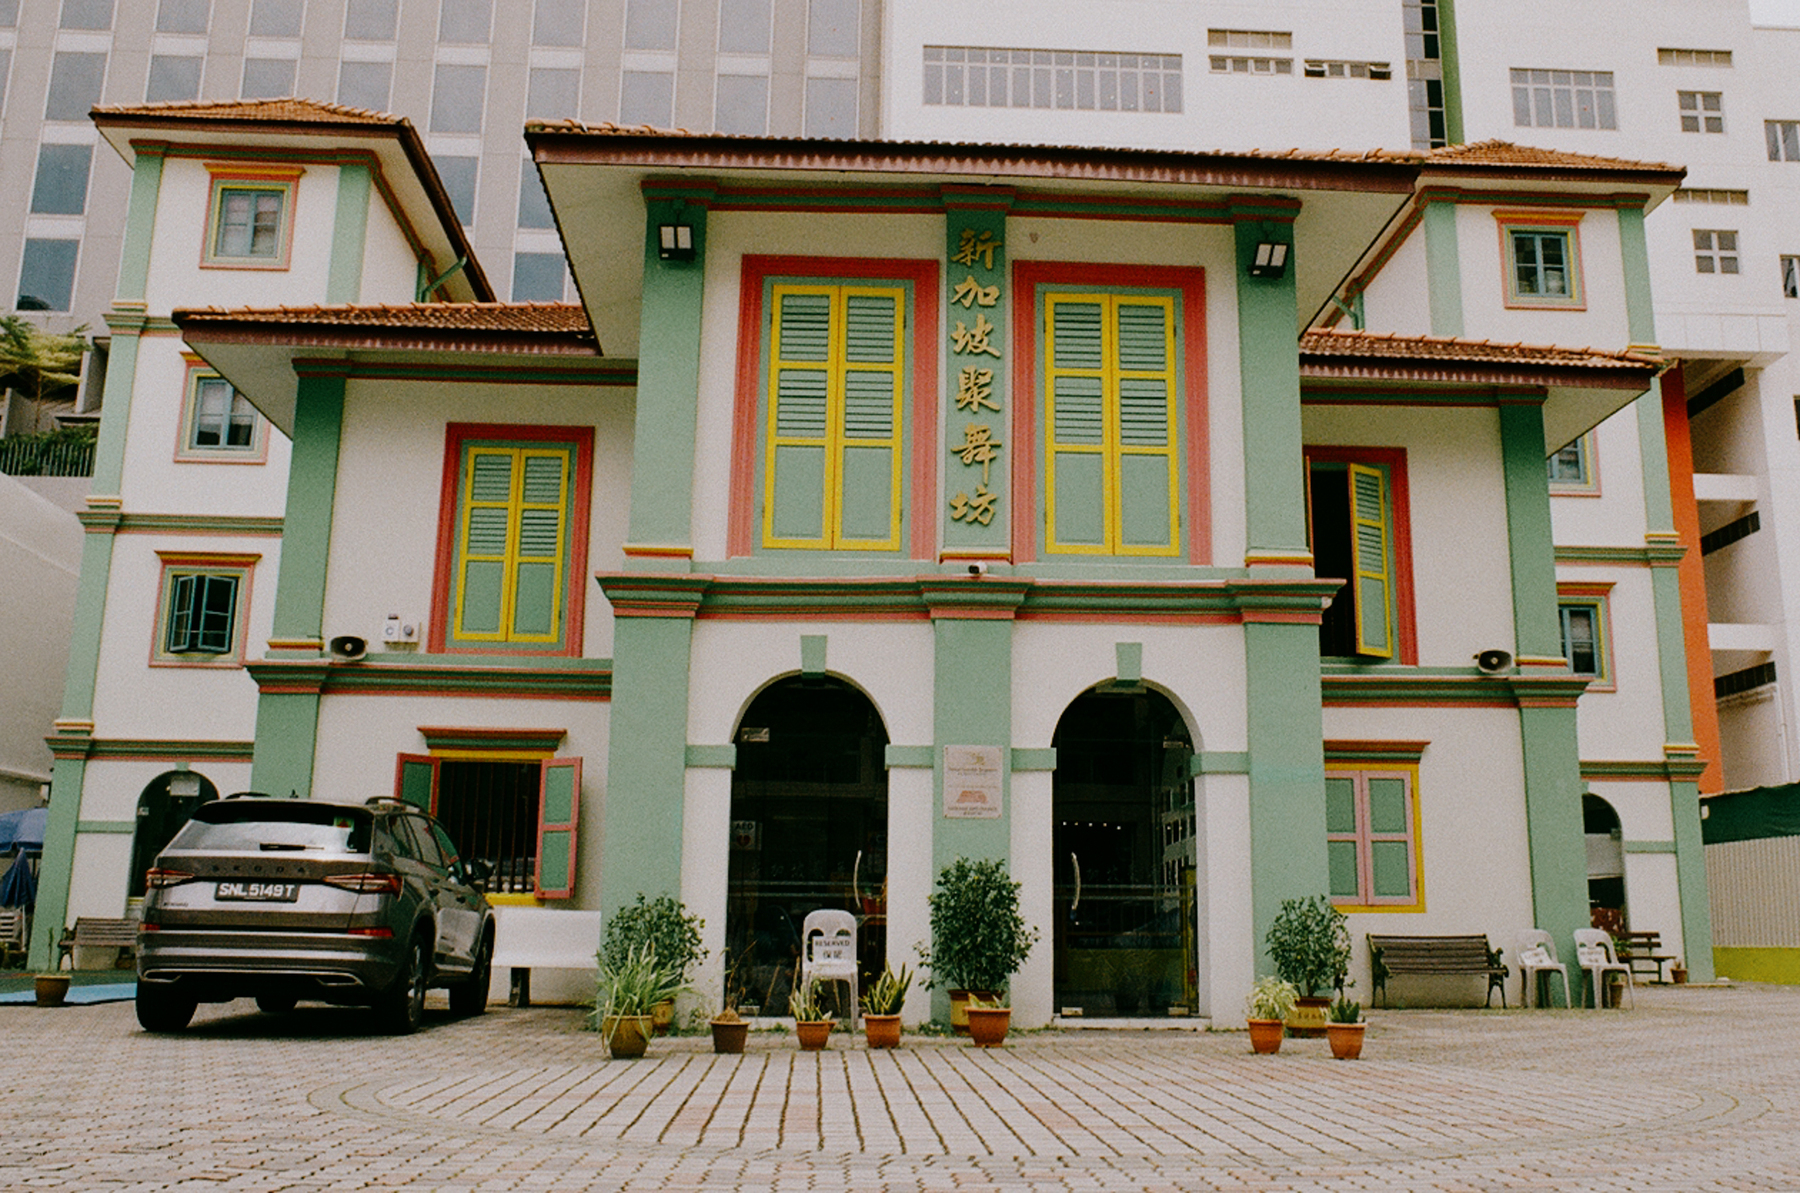 a scan of a color photo showing the exterior of an intricate old building in singapore with green, pink and yellow colors